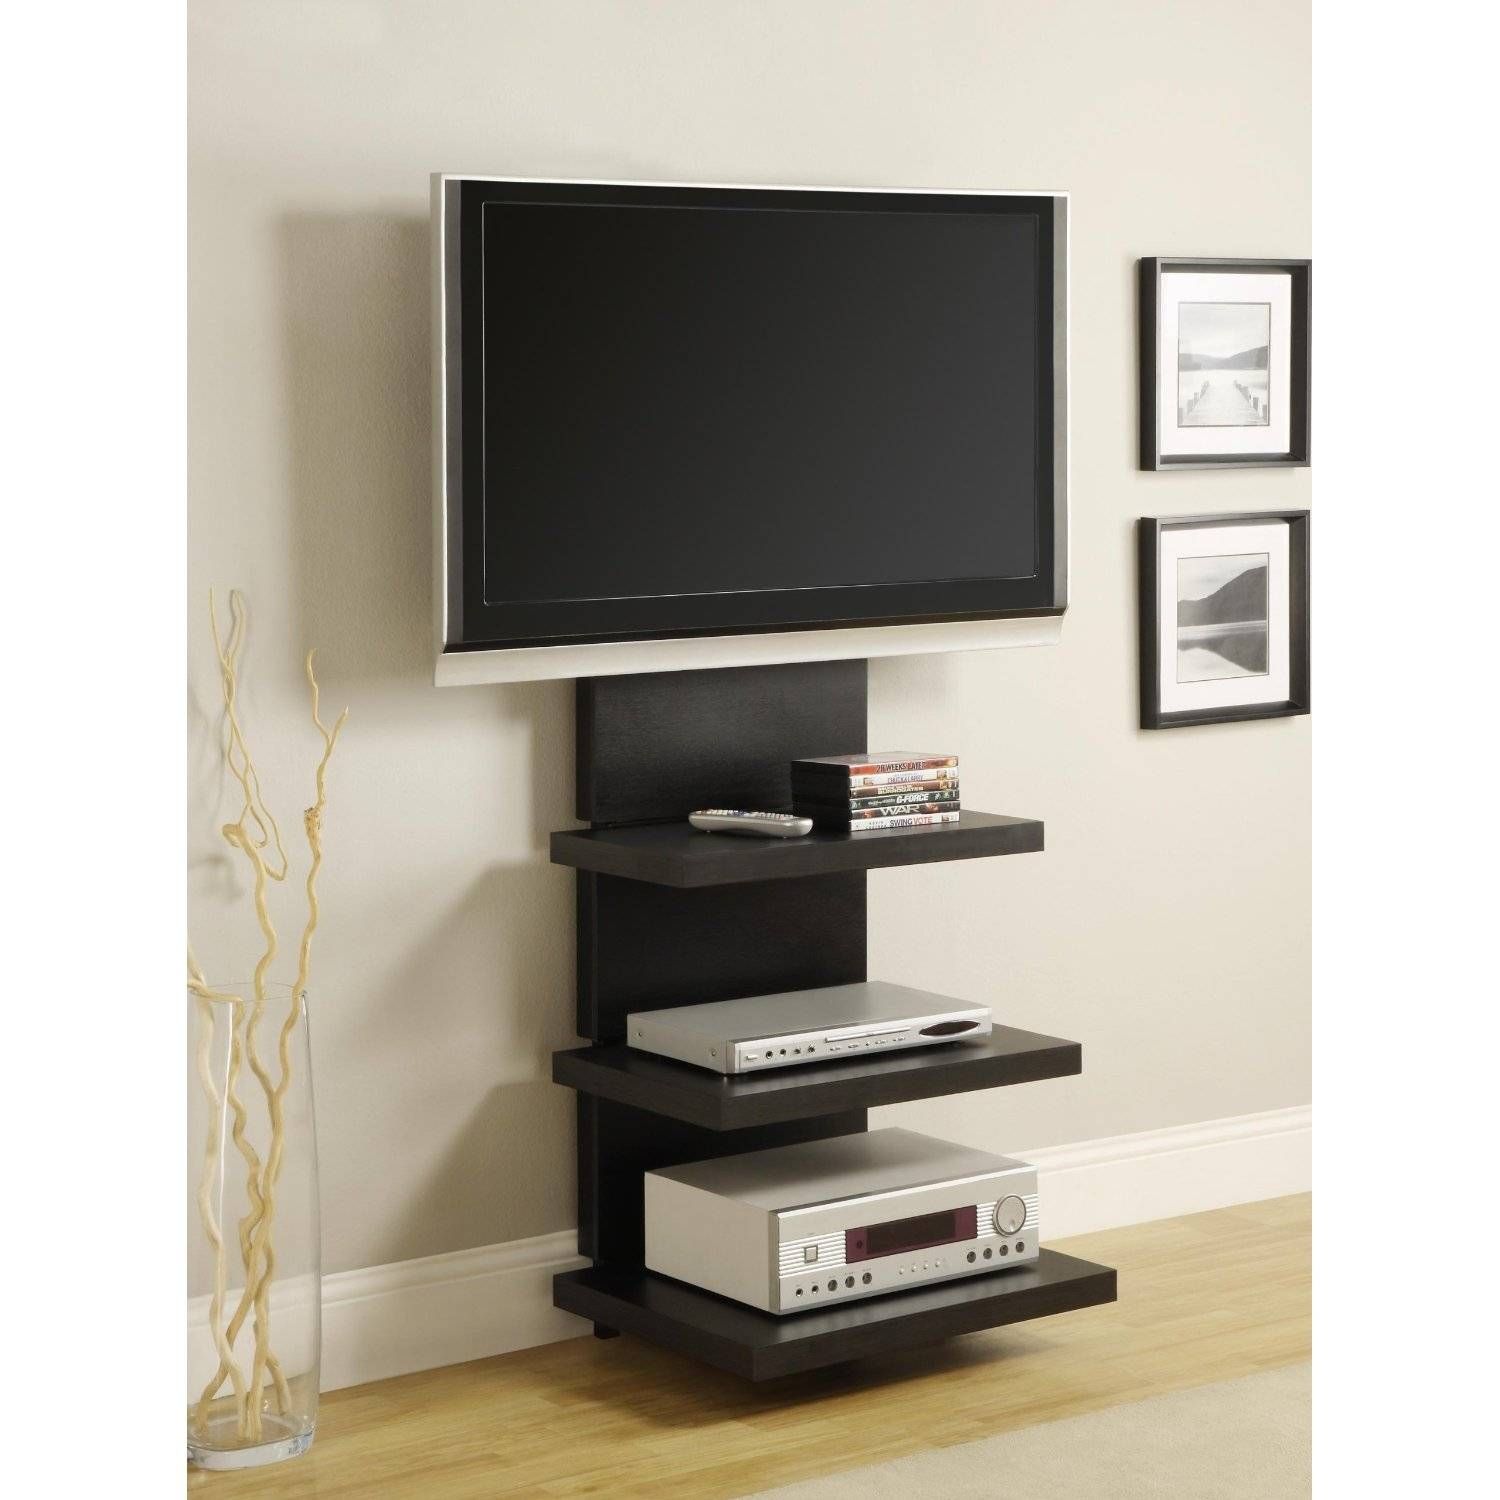 Tall Tv Stand For Bedroom Trends And Images Inside ~ Hamipara In Tall Skinny Tv Stands (Photo 14 of 15)